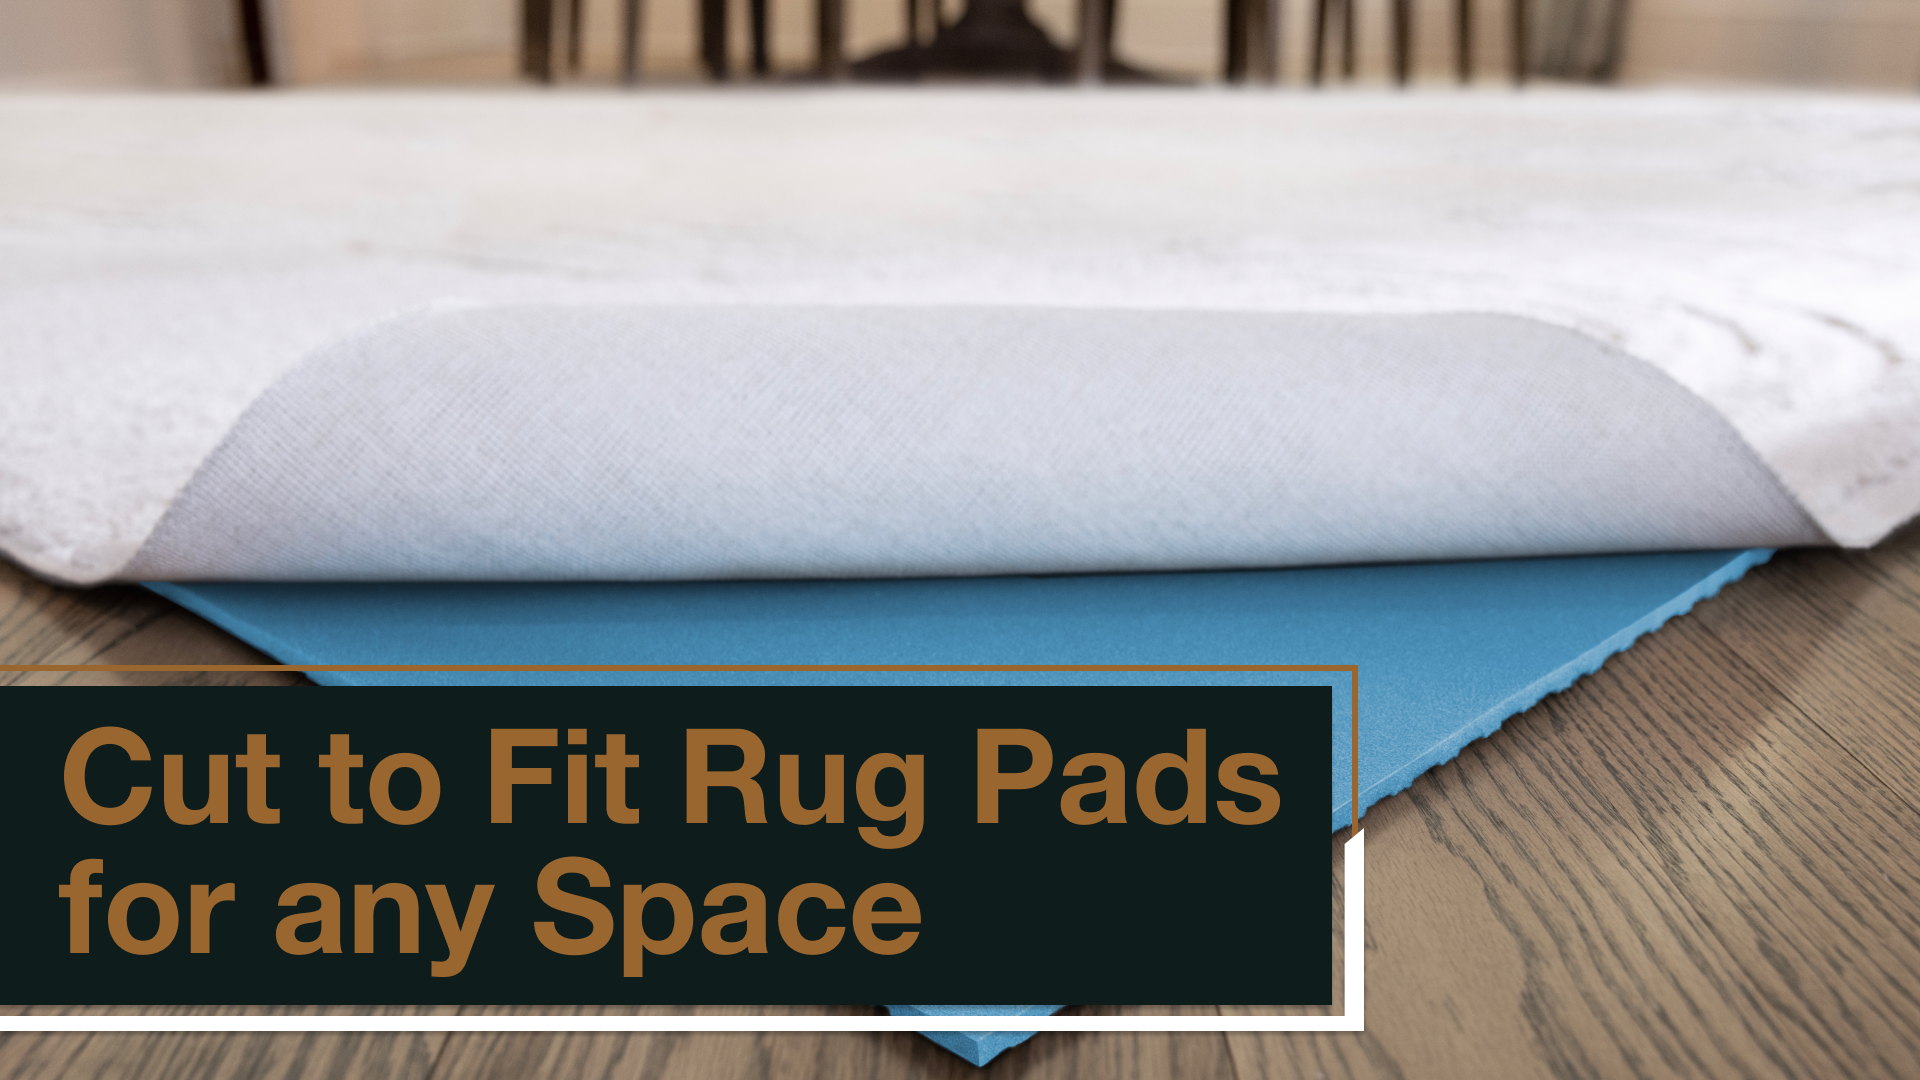 Cut to Fit Rug Pads for any Space